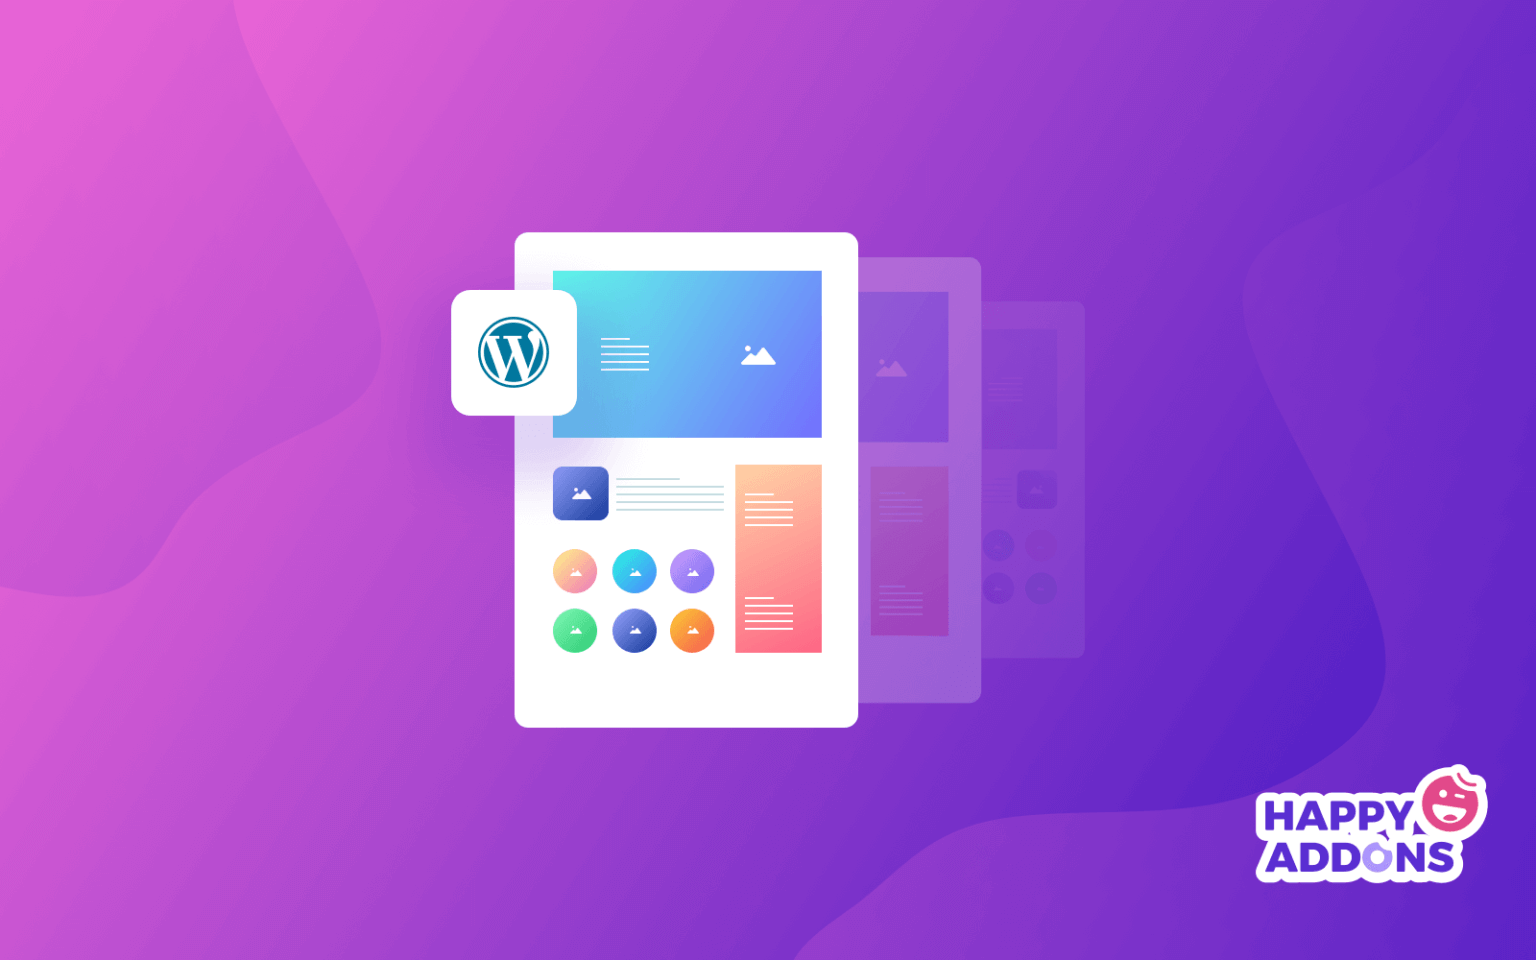 Free templates in WordPress Page Builder